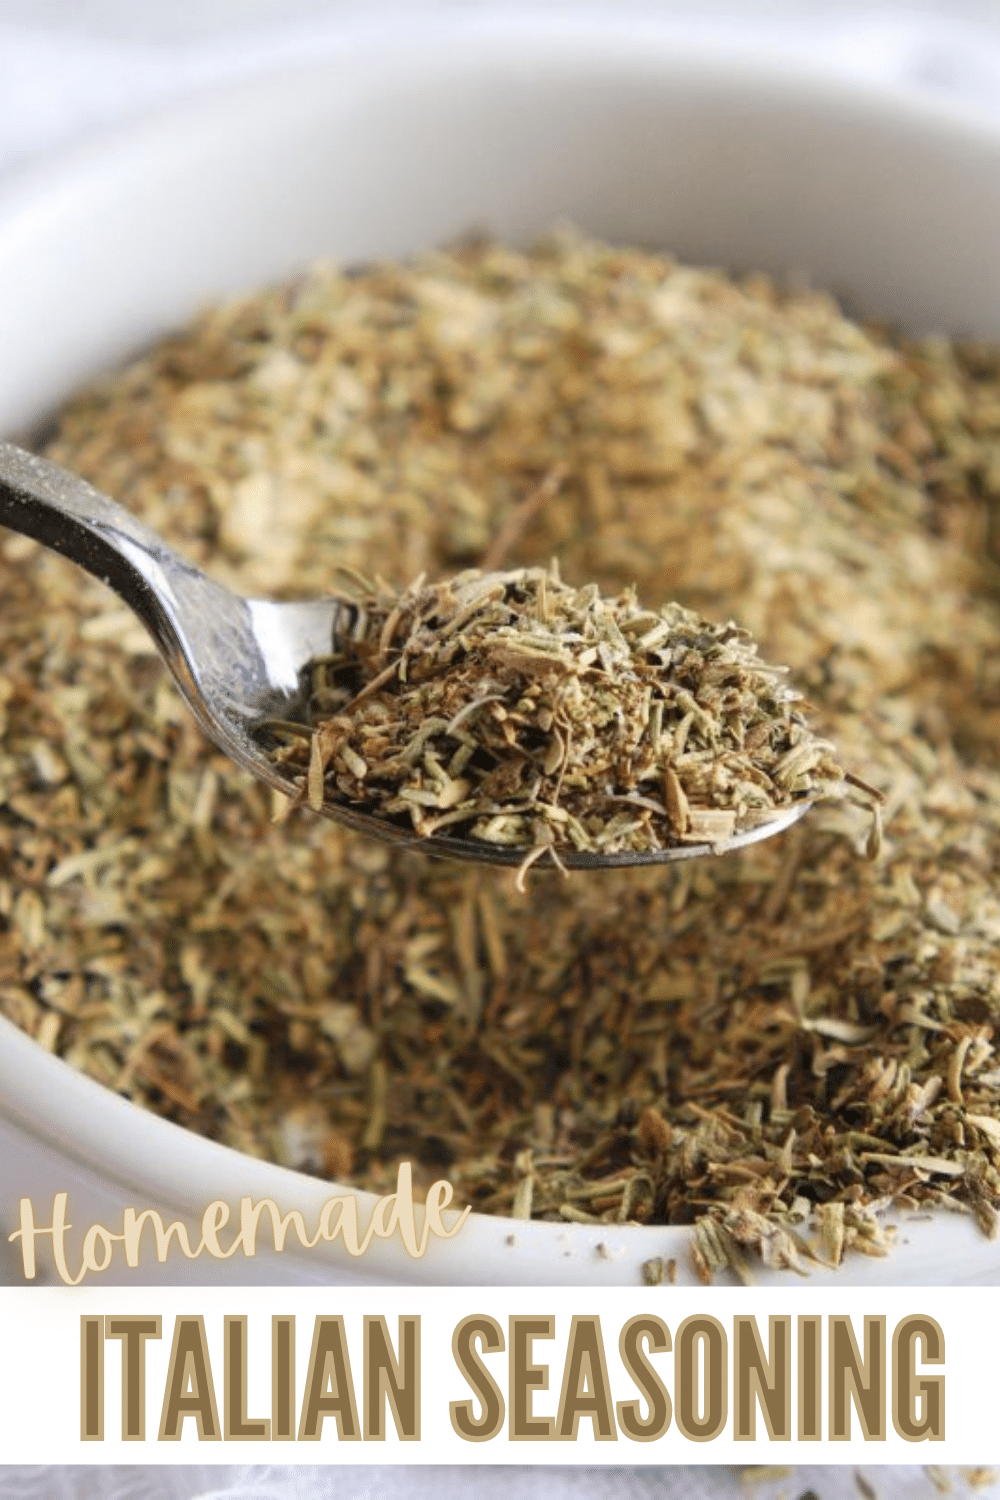 This homemade Italian seasoning recipe is gluten-free, sugar-free and salt-free. It is quick to make and tastes great in so many recipes and dressings. #italianseasoning #homemadeseasoning #seasoningmix via @wondermomwannab